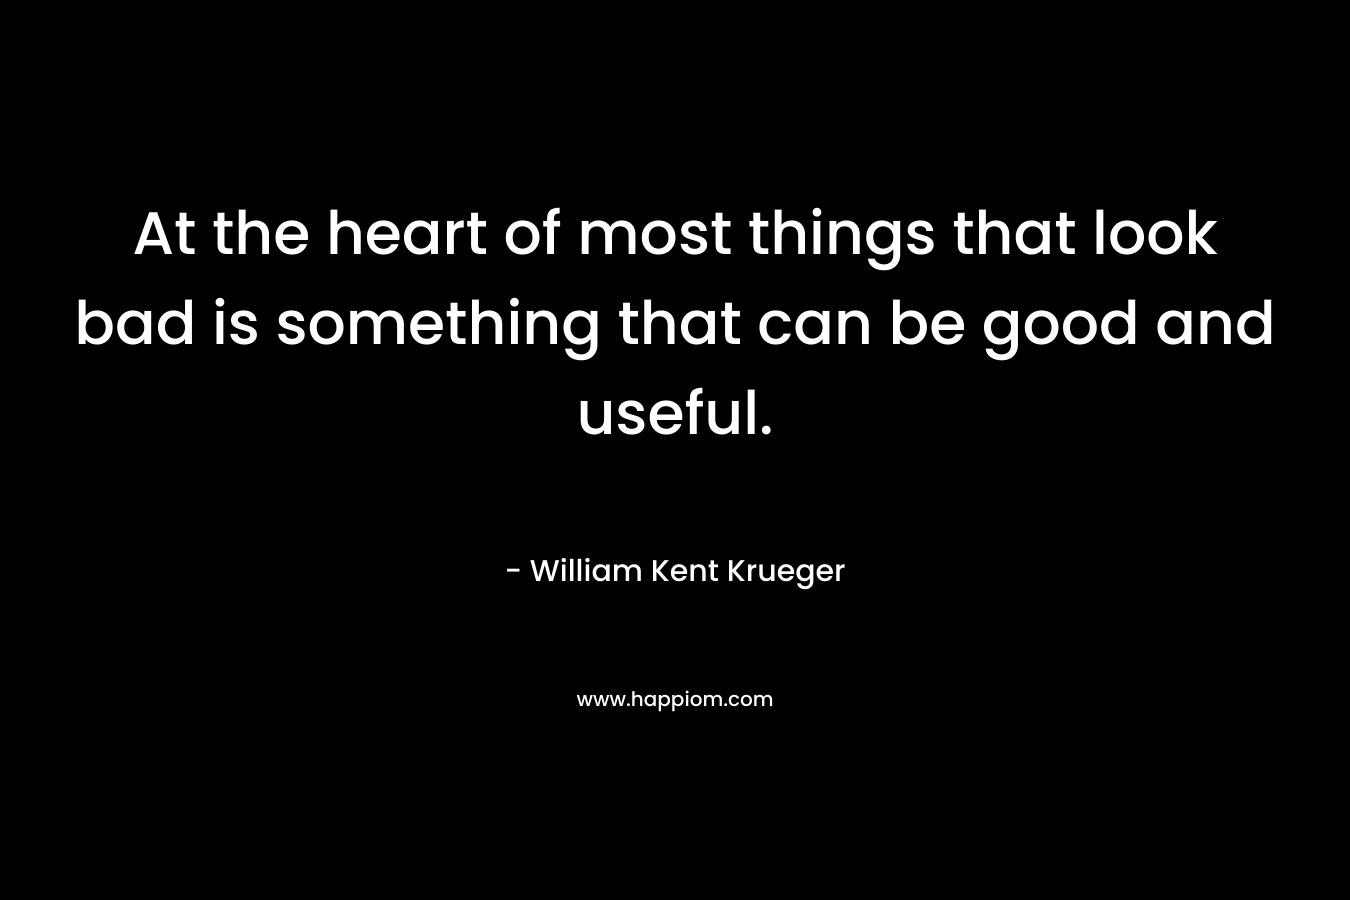 At the heart of most things that look bad is something that can be good and useful. – William Kent Krueger